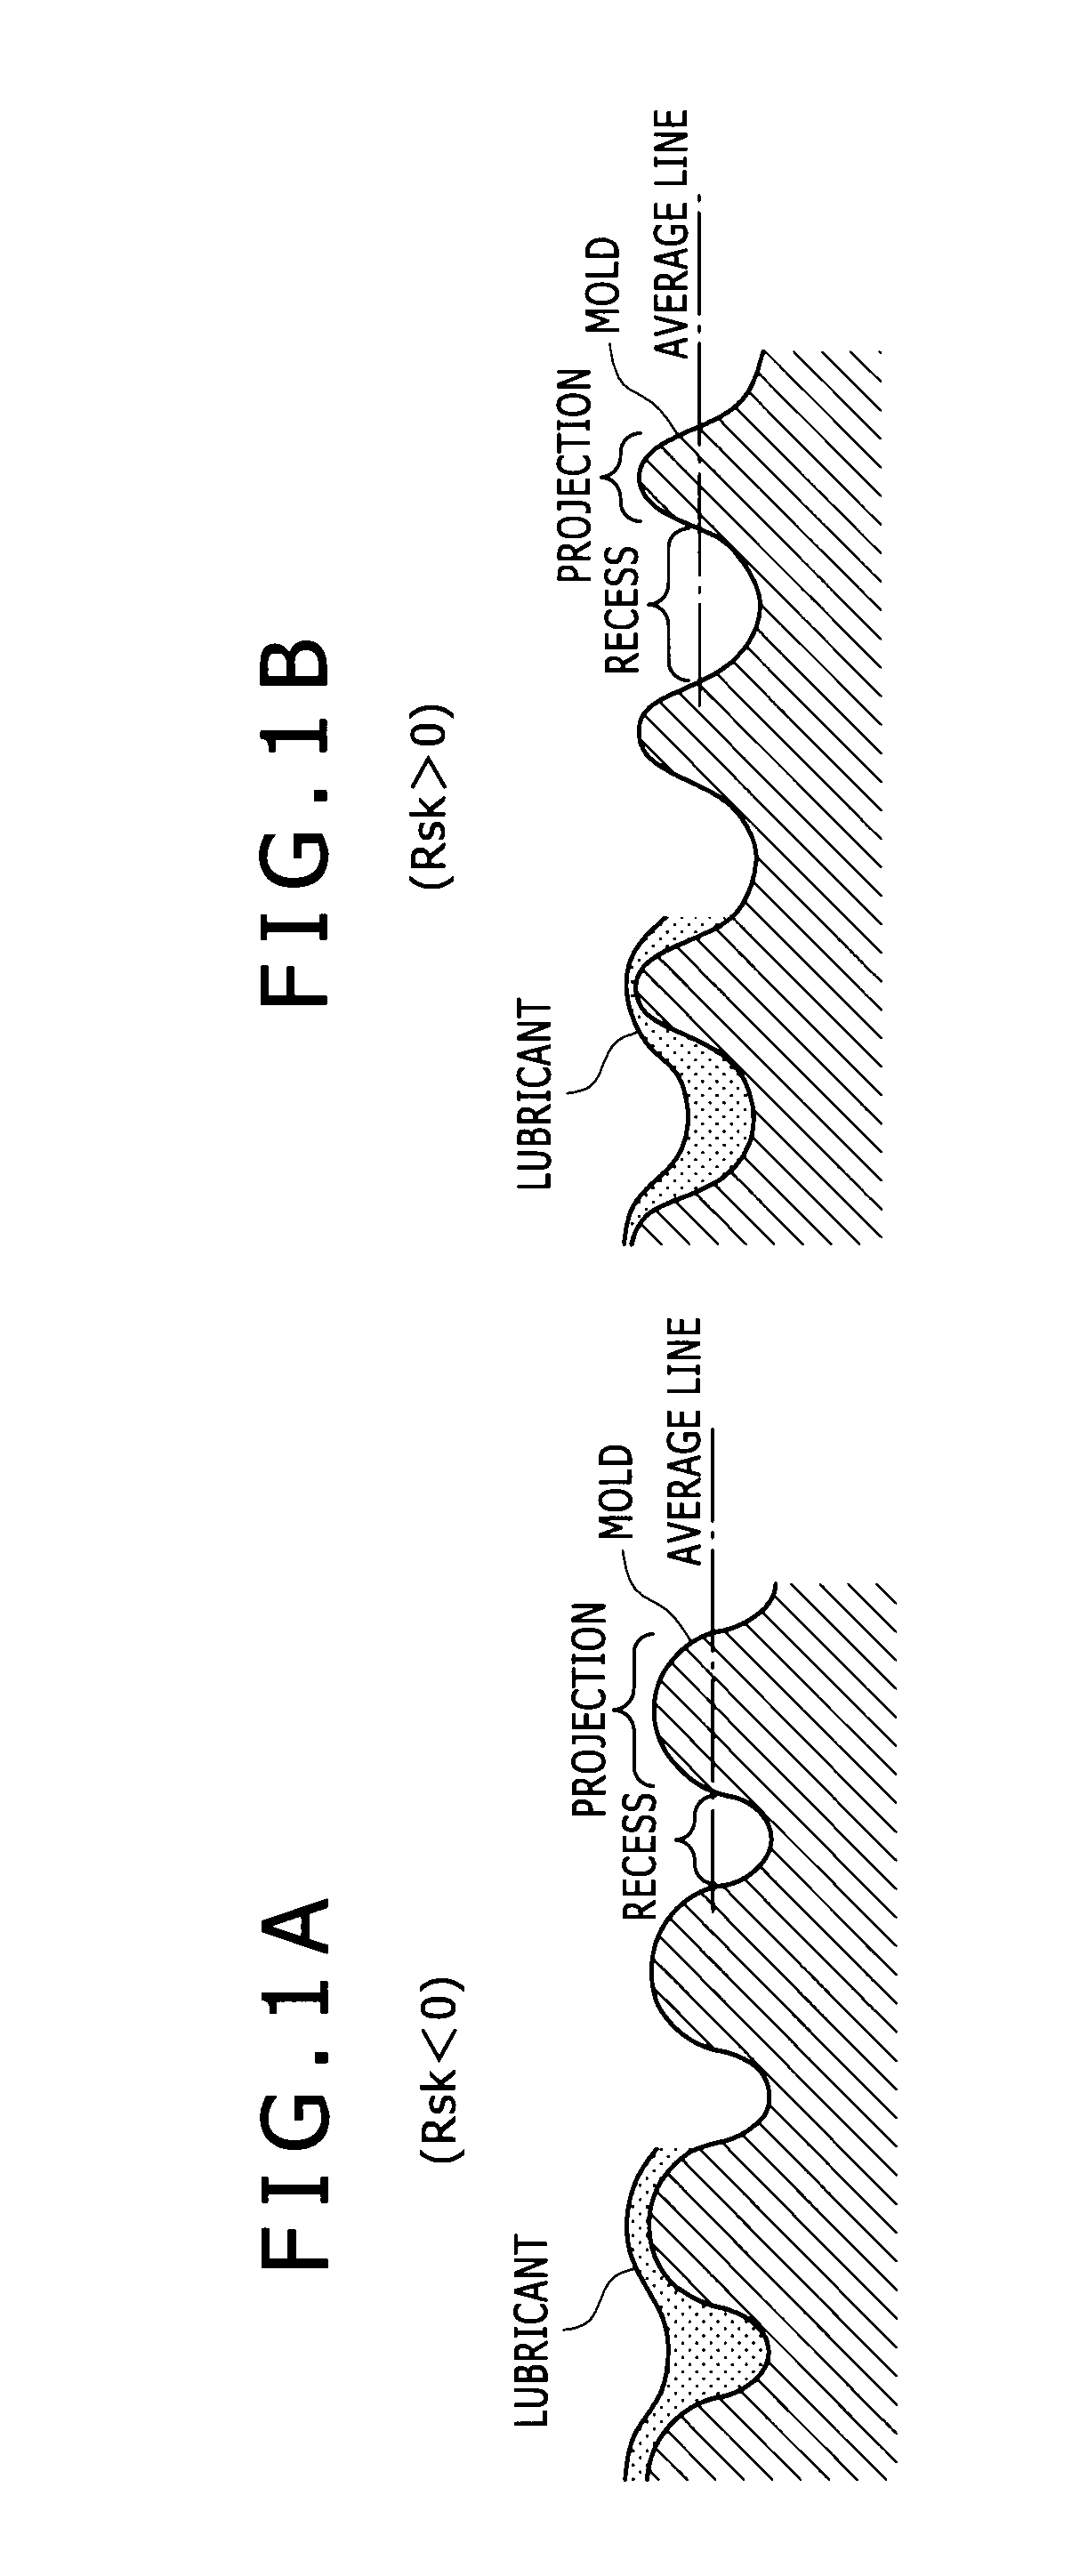 Mold for plastic forming and a method for producing the same, and method for forging aluminum material